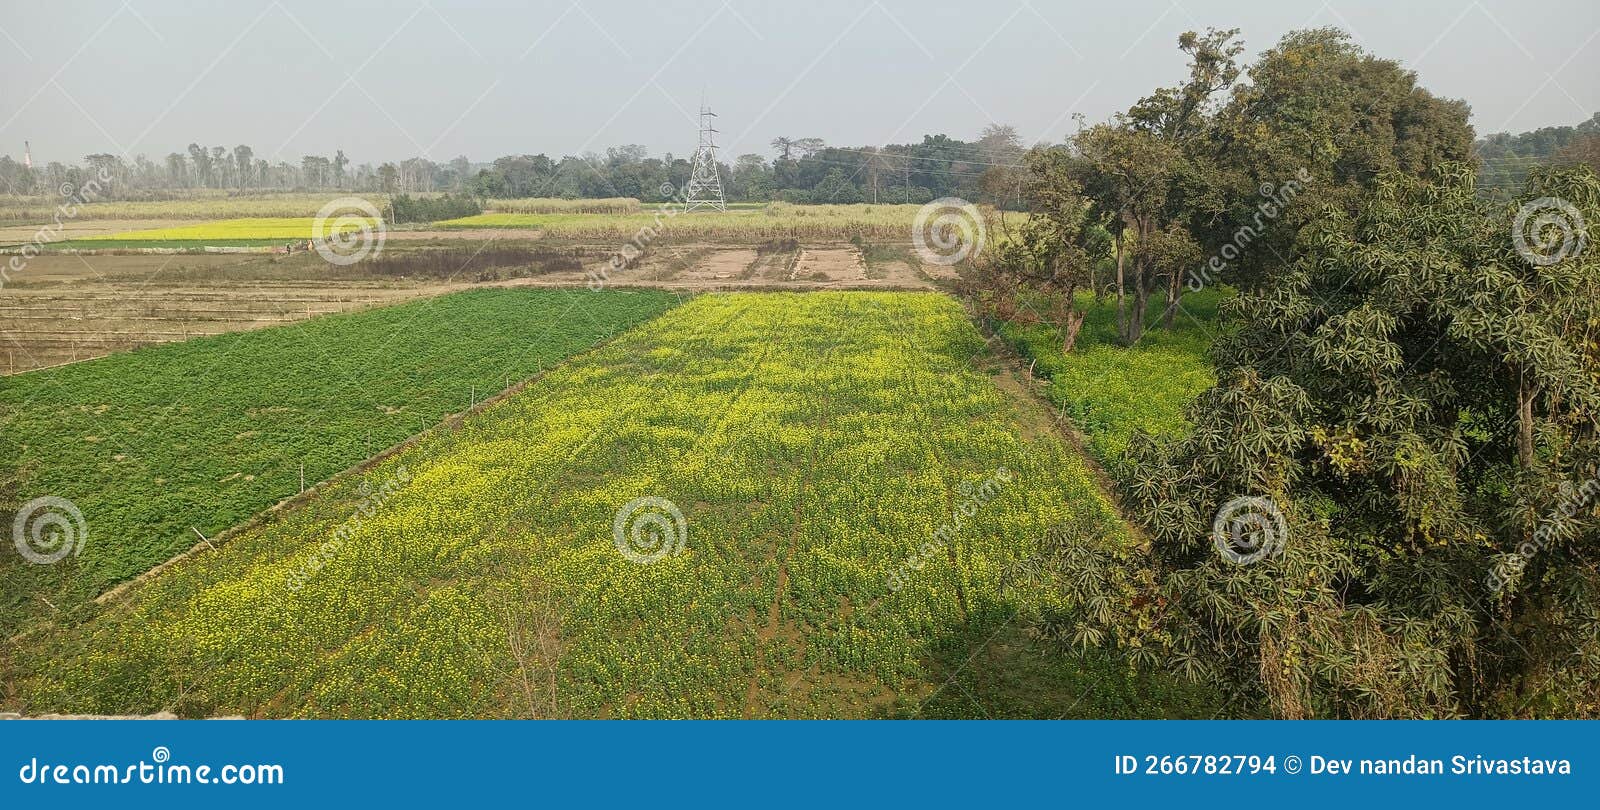 along with wheat and rice, potatoes and mustard are also produced in lakhimpur kheri district of uttar pradesh, th